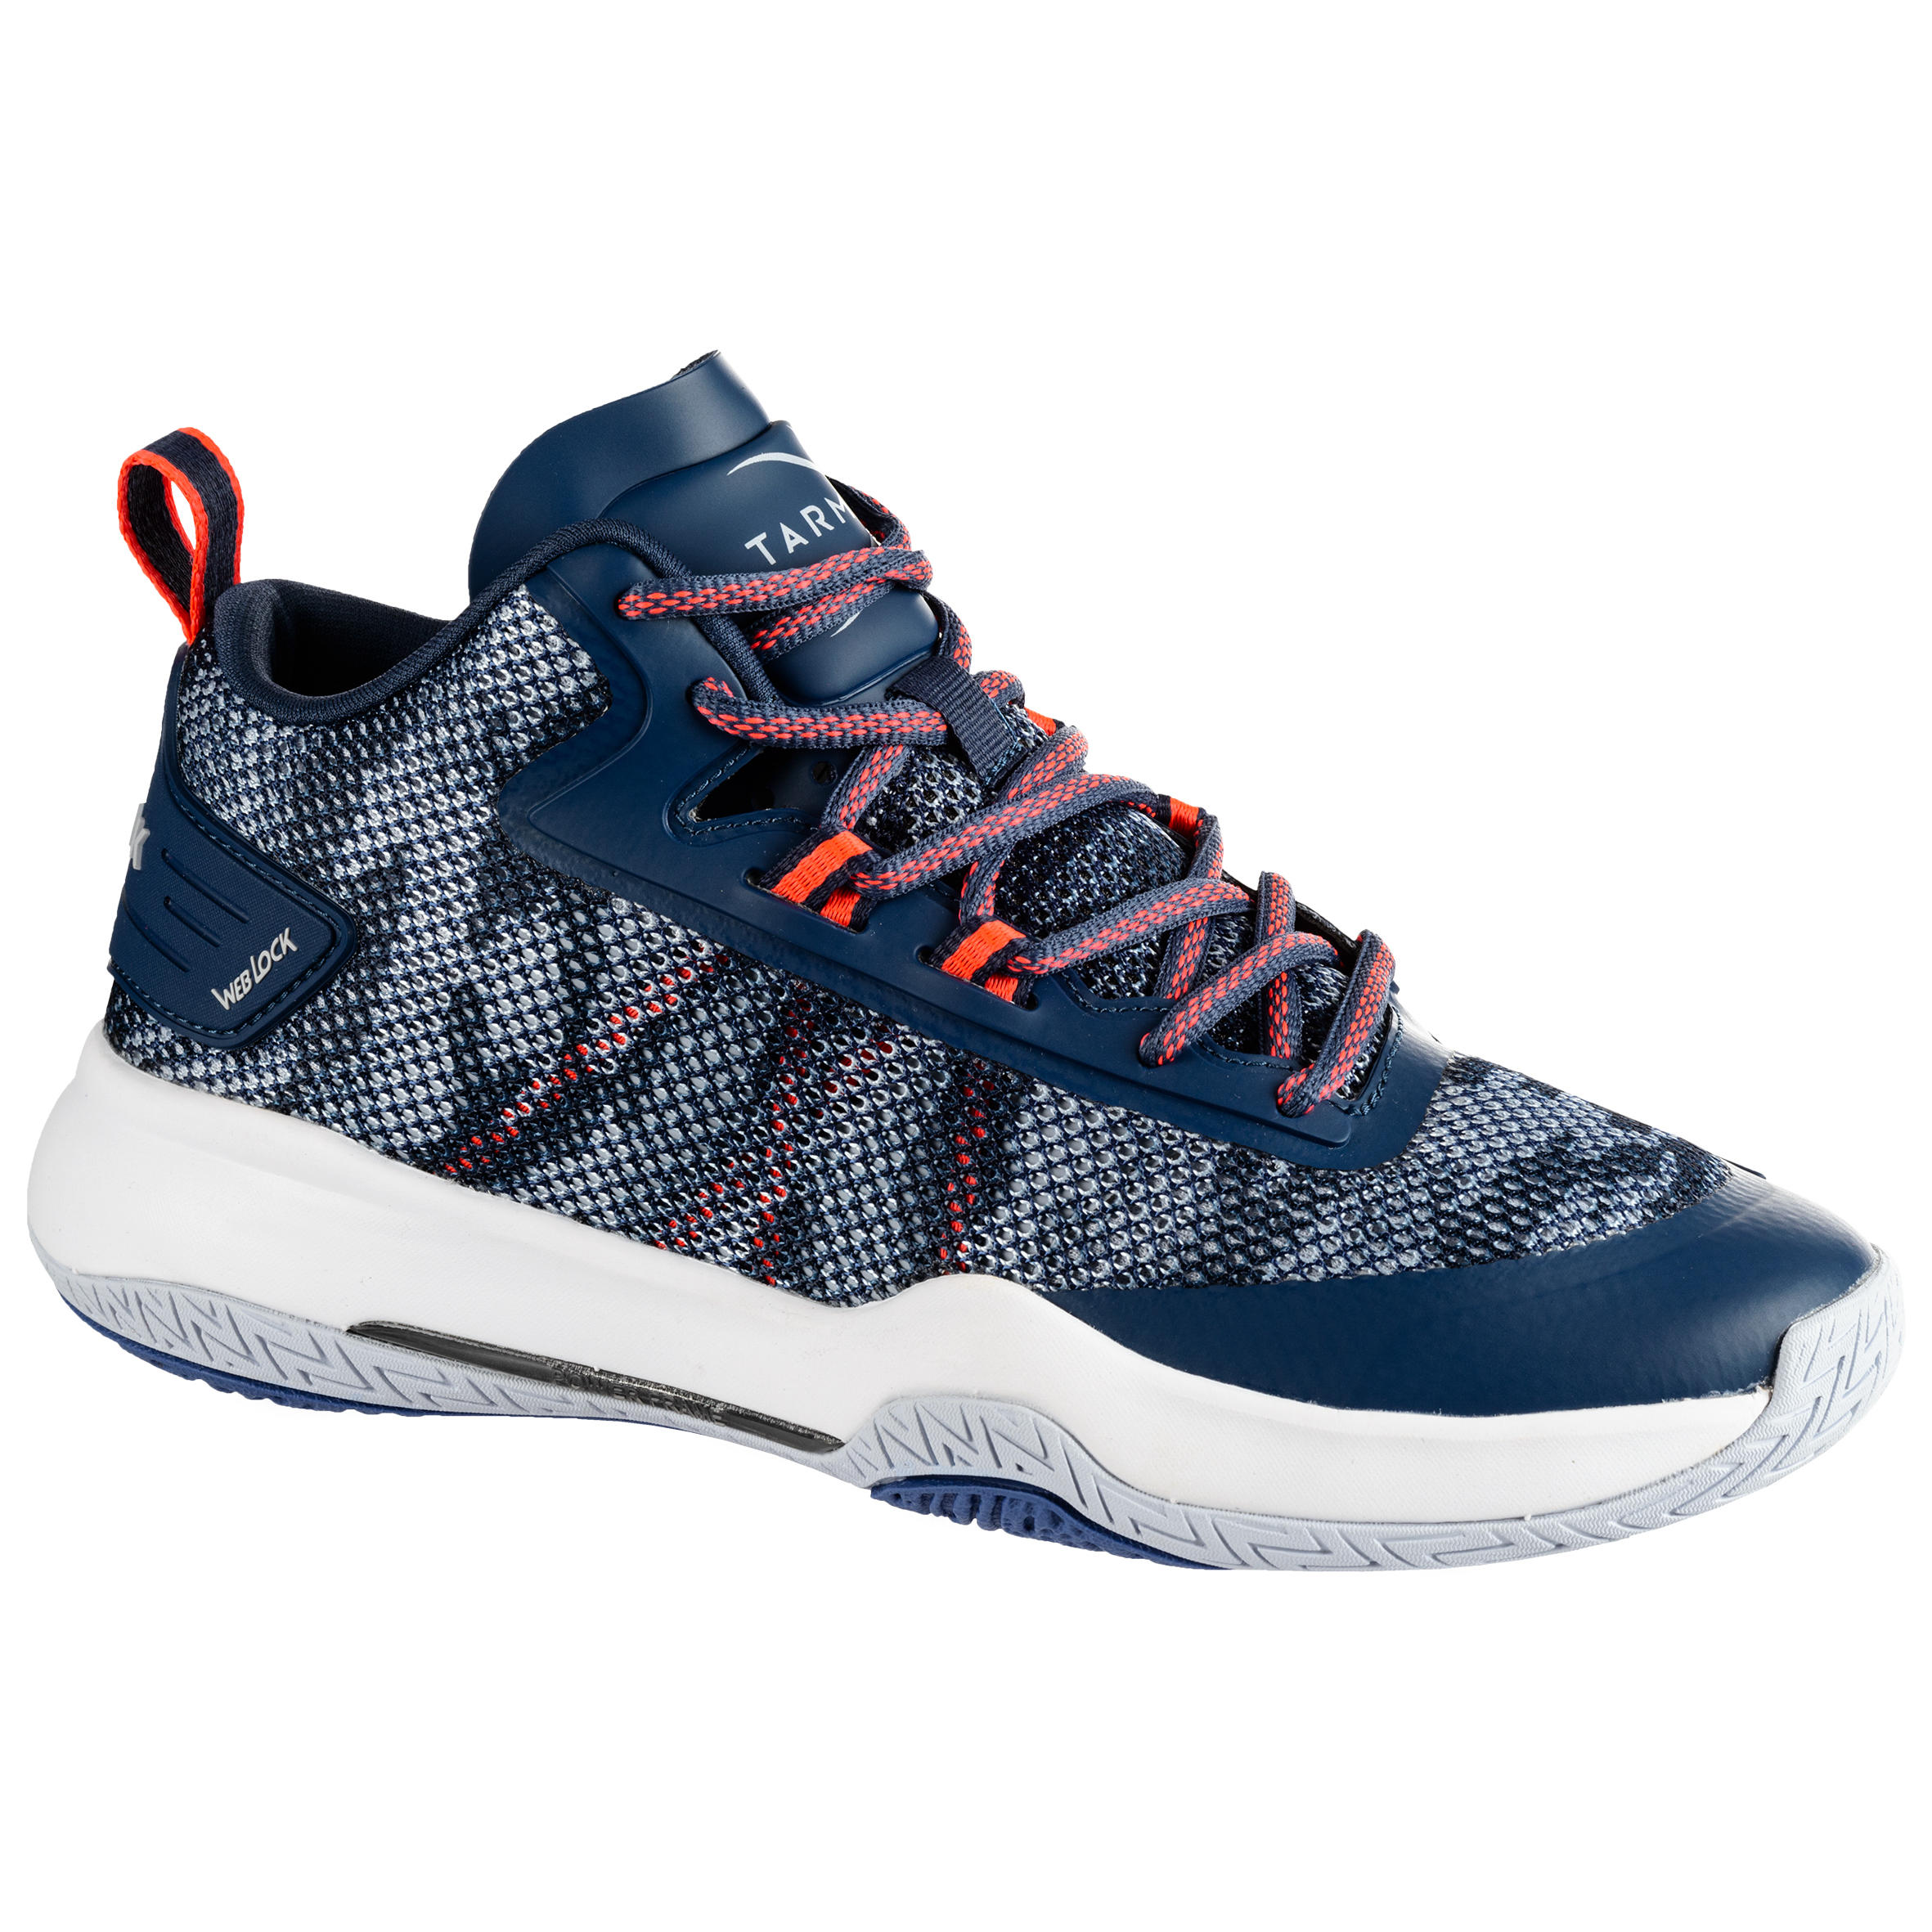 SC500 Women's Mid Basketball Shoes 